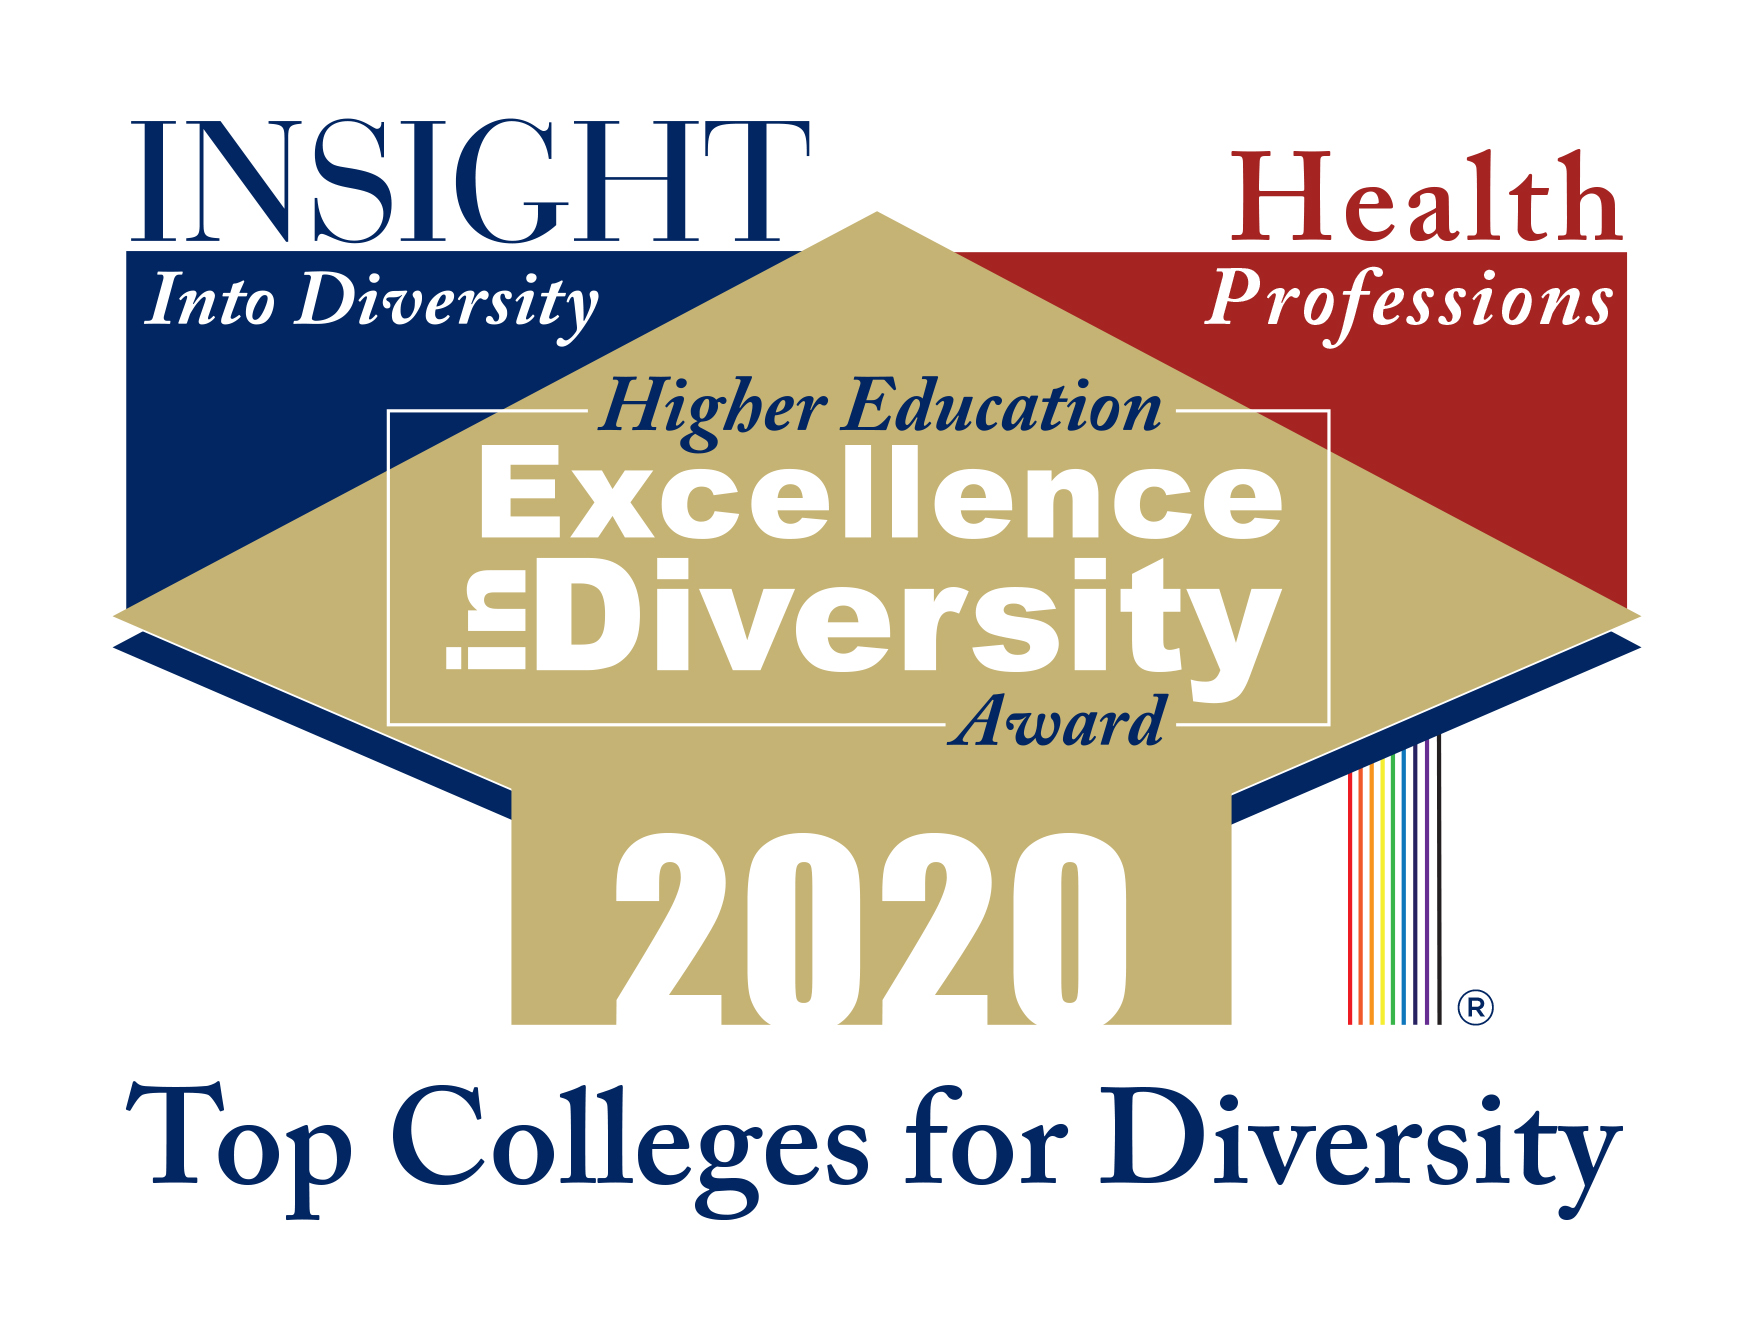 INSIGHT Into Diversity Health Professions Higher Education Excellence -Diversity Award 2020